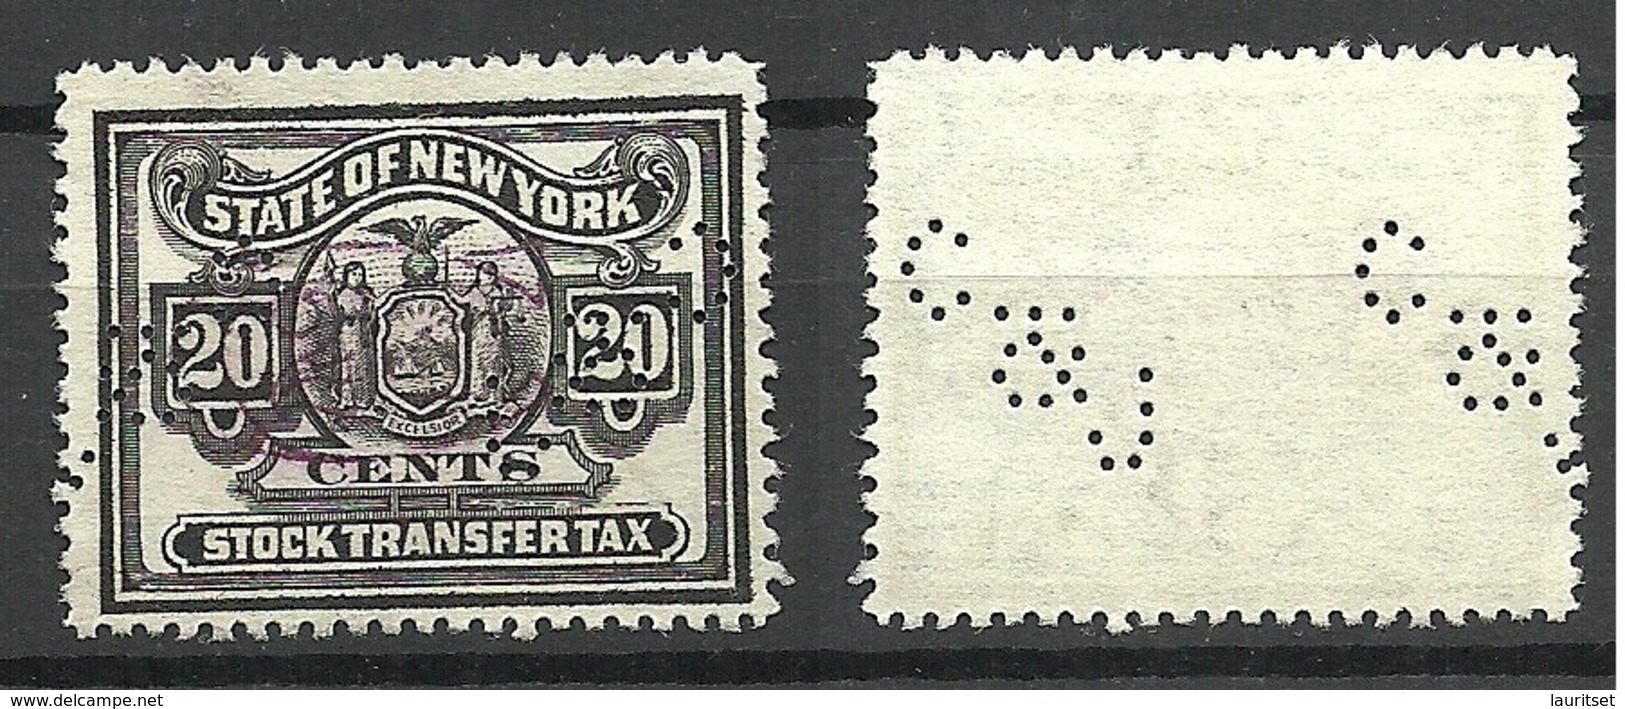 USA State Of New York Stock Transfer Tax 20 Cents, Used - Steuermarken